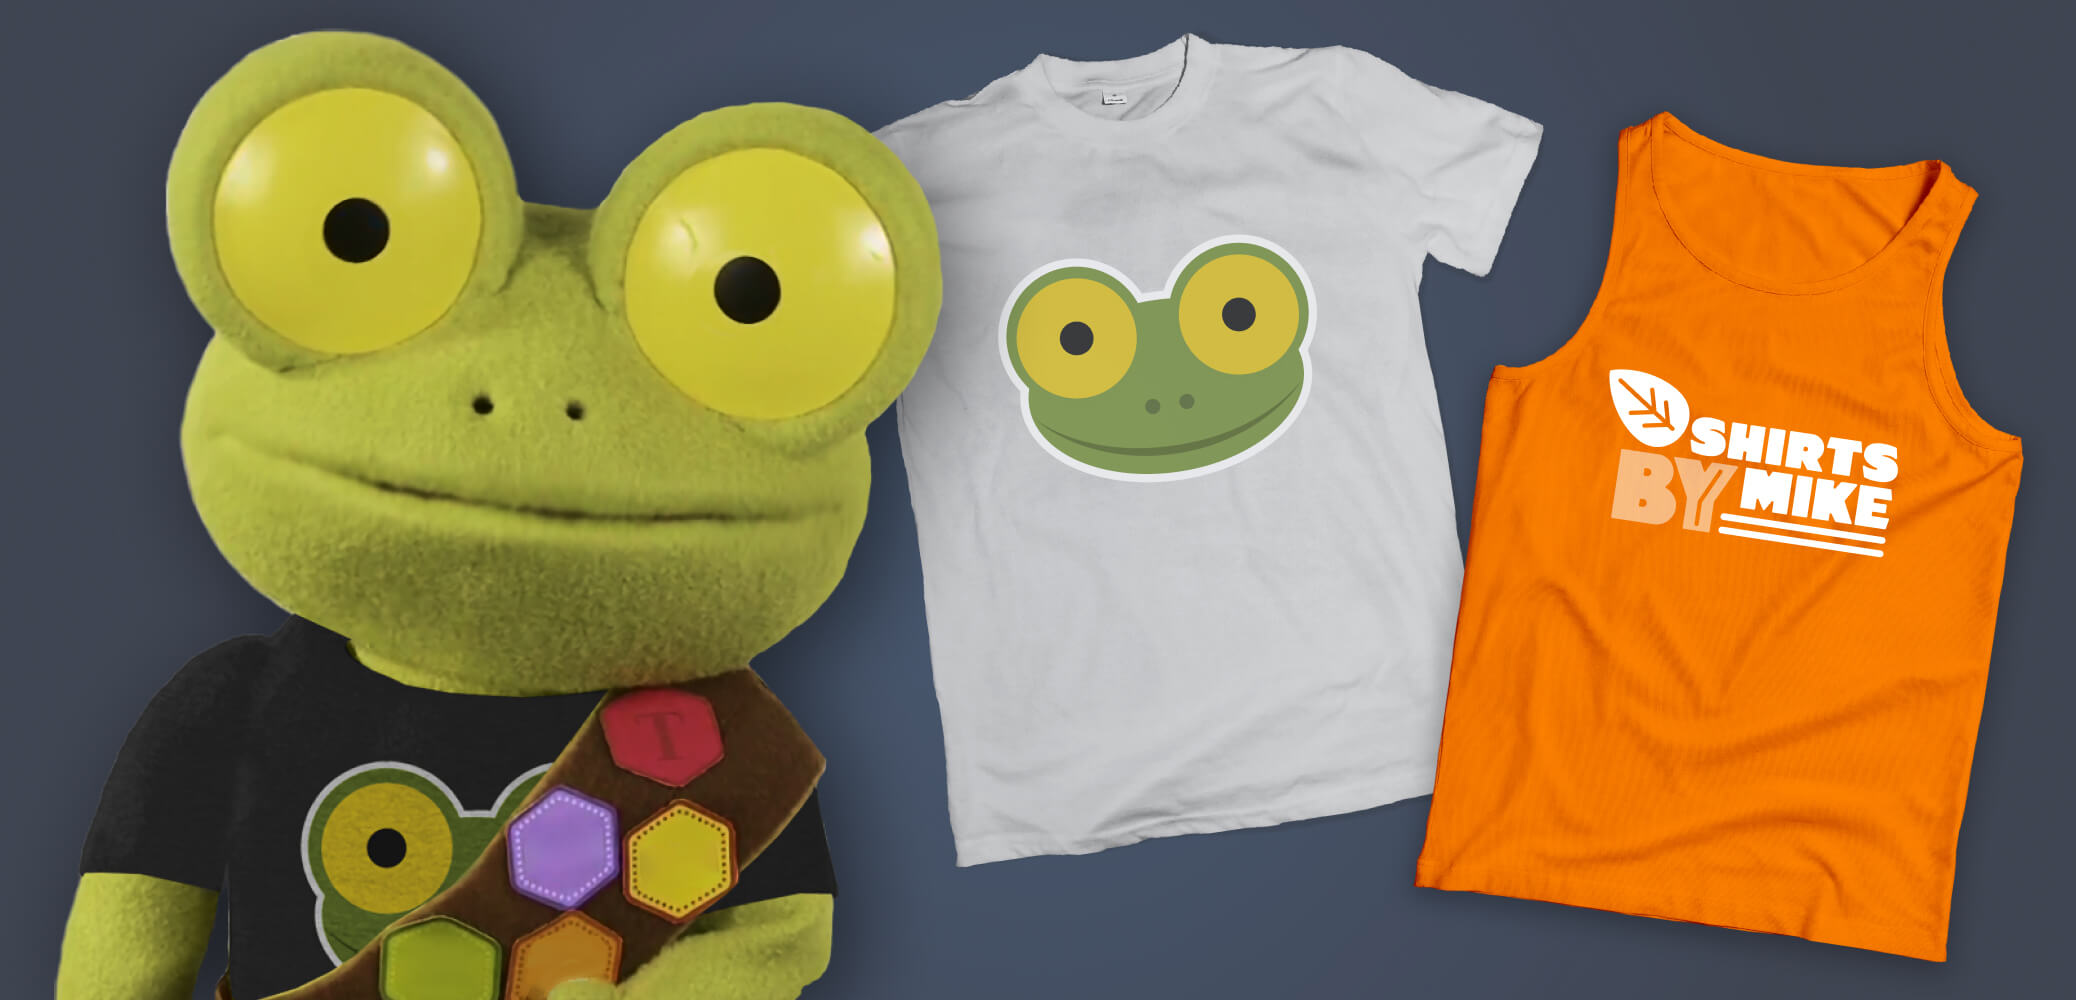 Shirts By Mike hero image. Mike the frog with a white t-shirt and orange tank top.